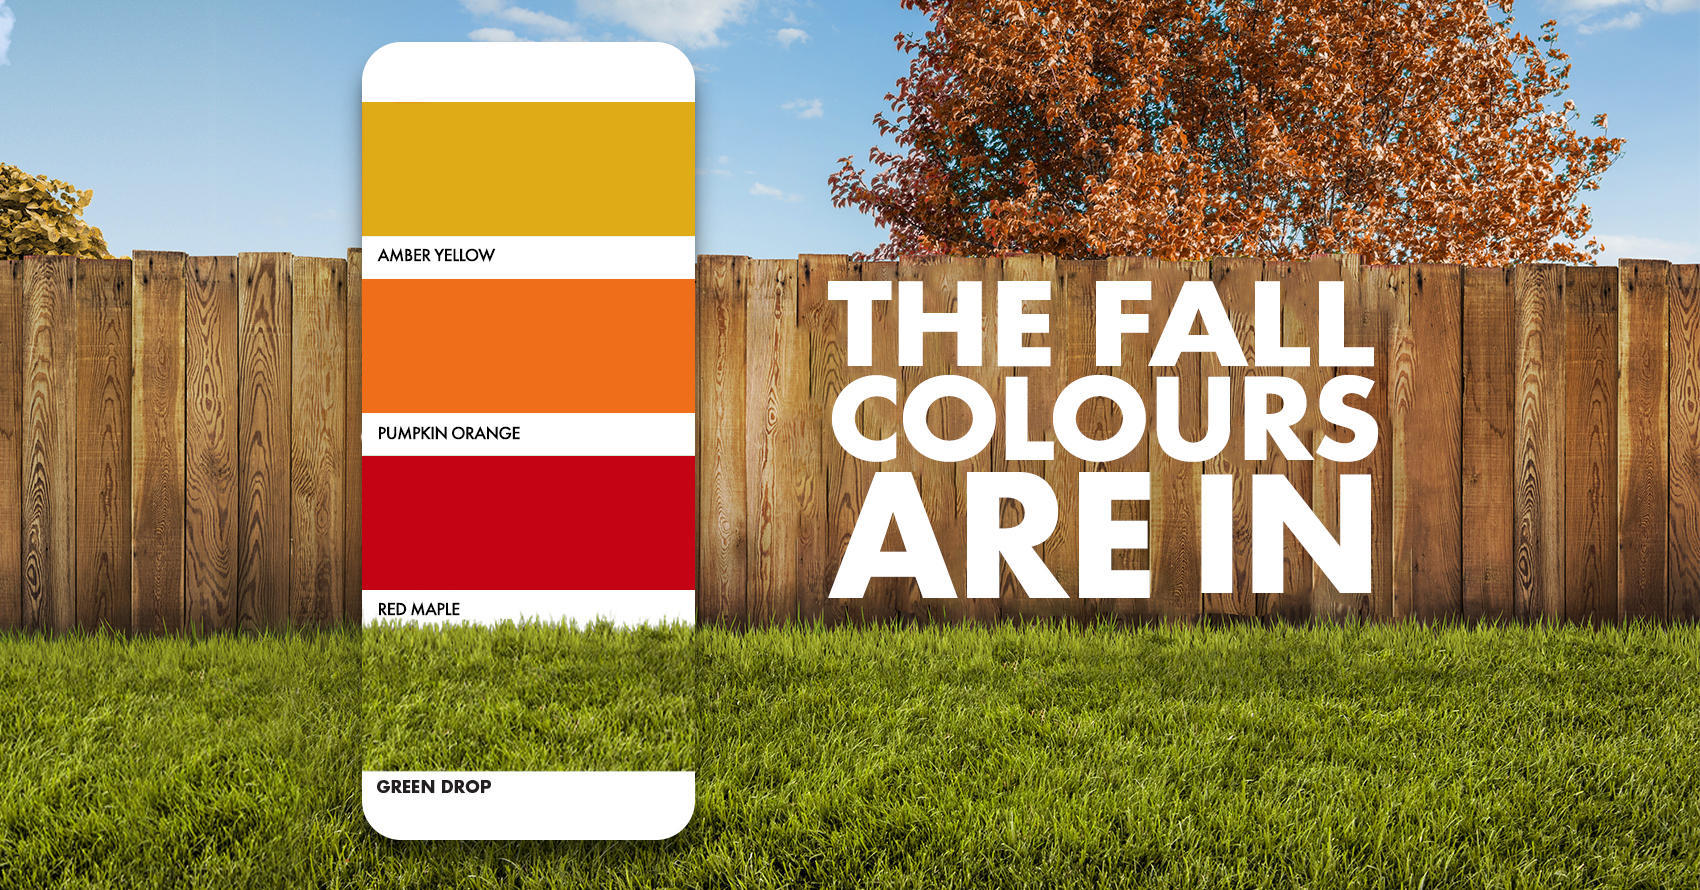 The summer of colours are in!